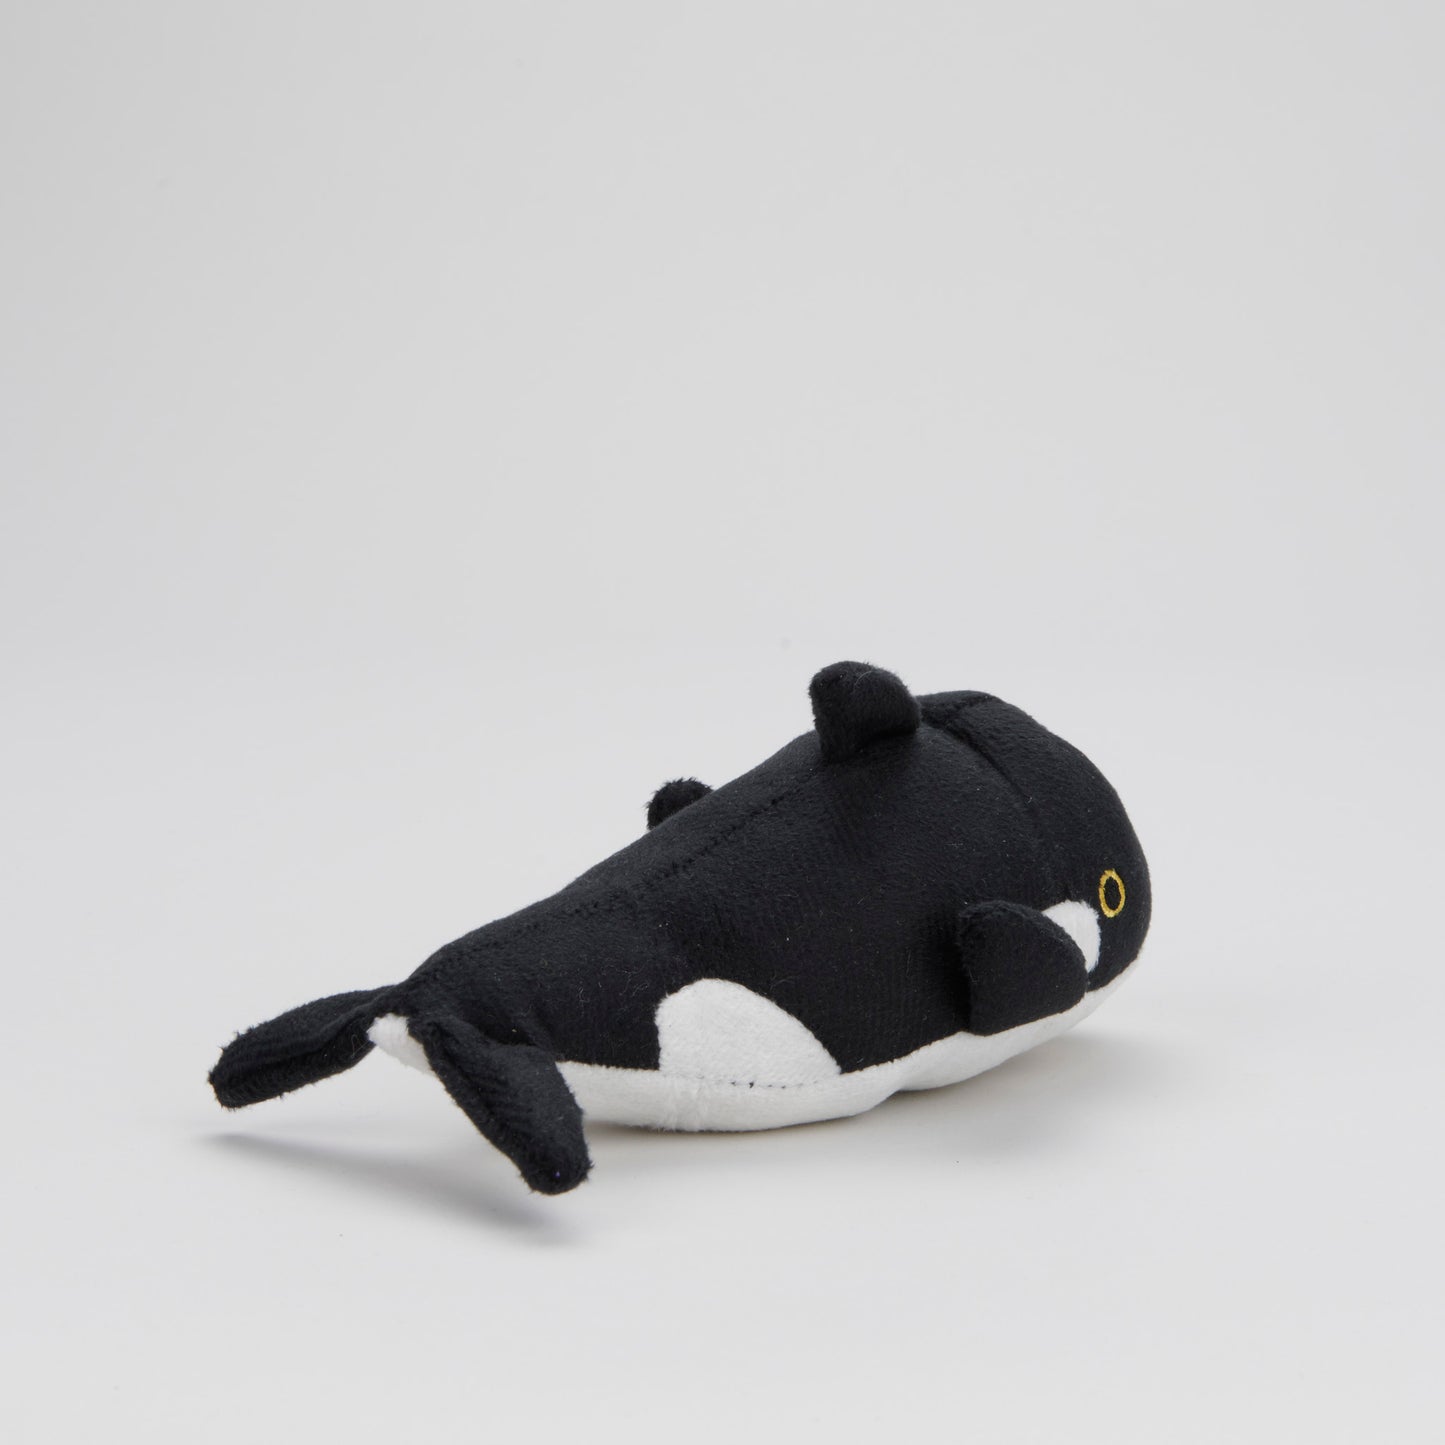 Dog Toy - Mighty Jr Ocean Whale